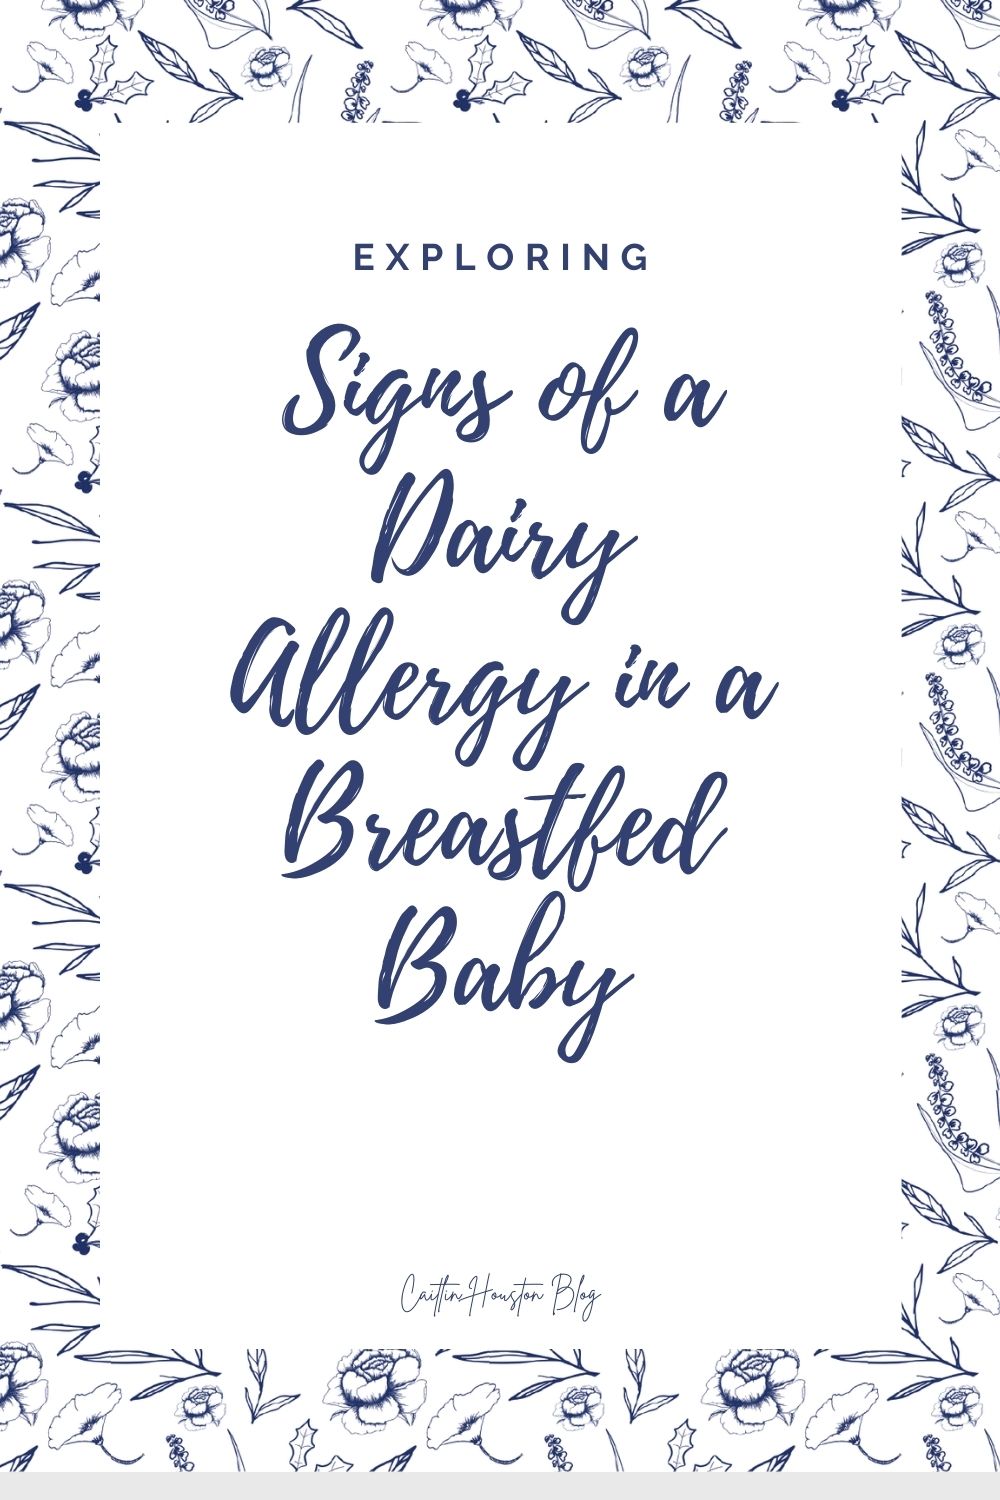 Signs of a Dairy Allergy in a Breastfed Baby